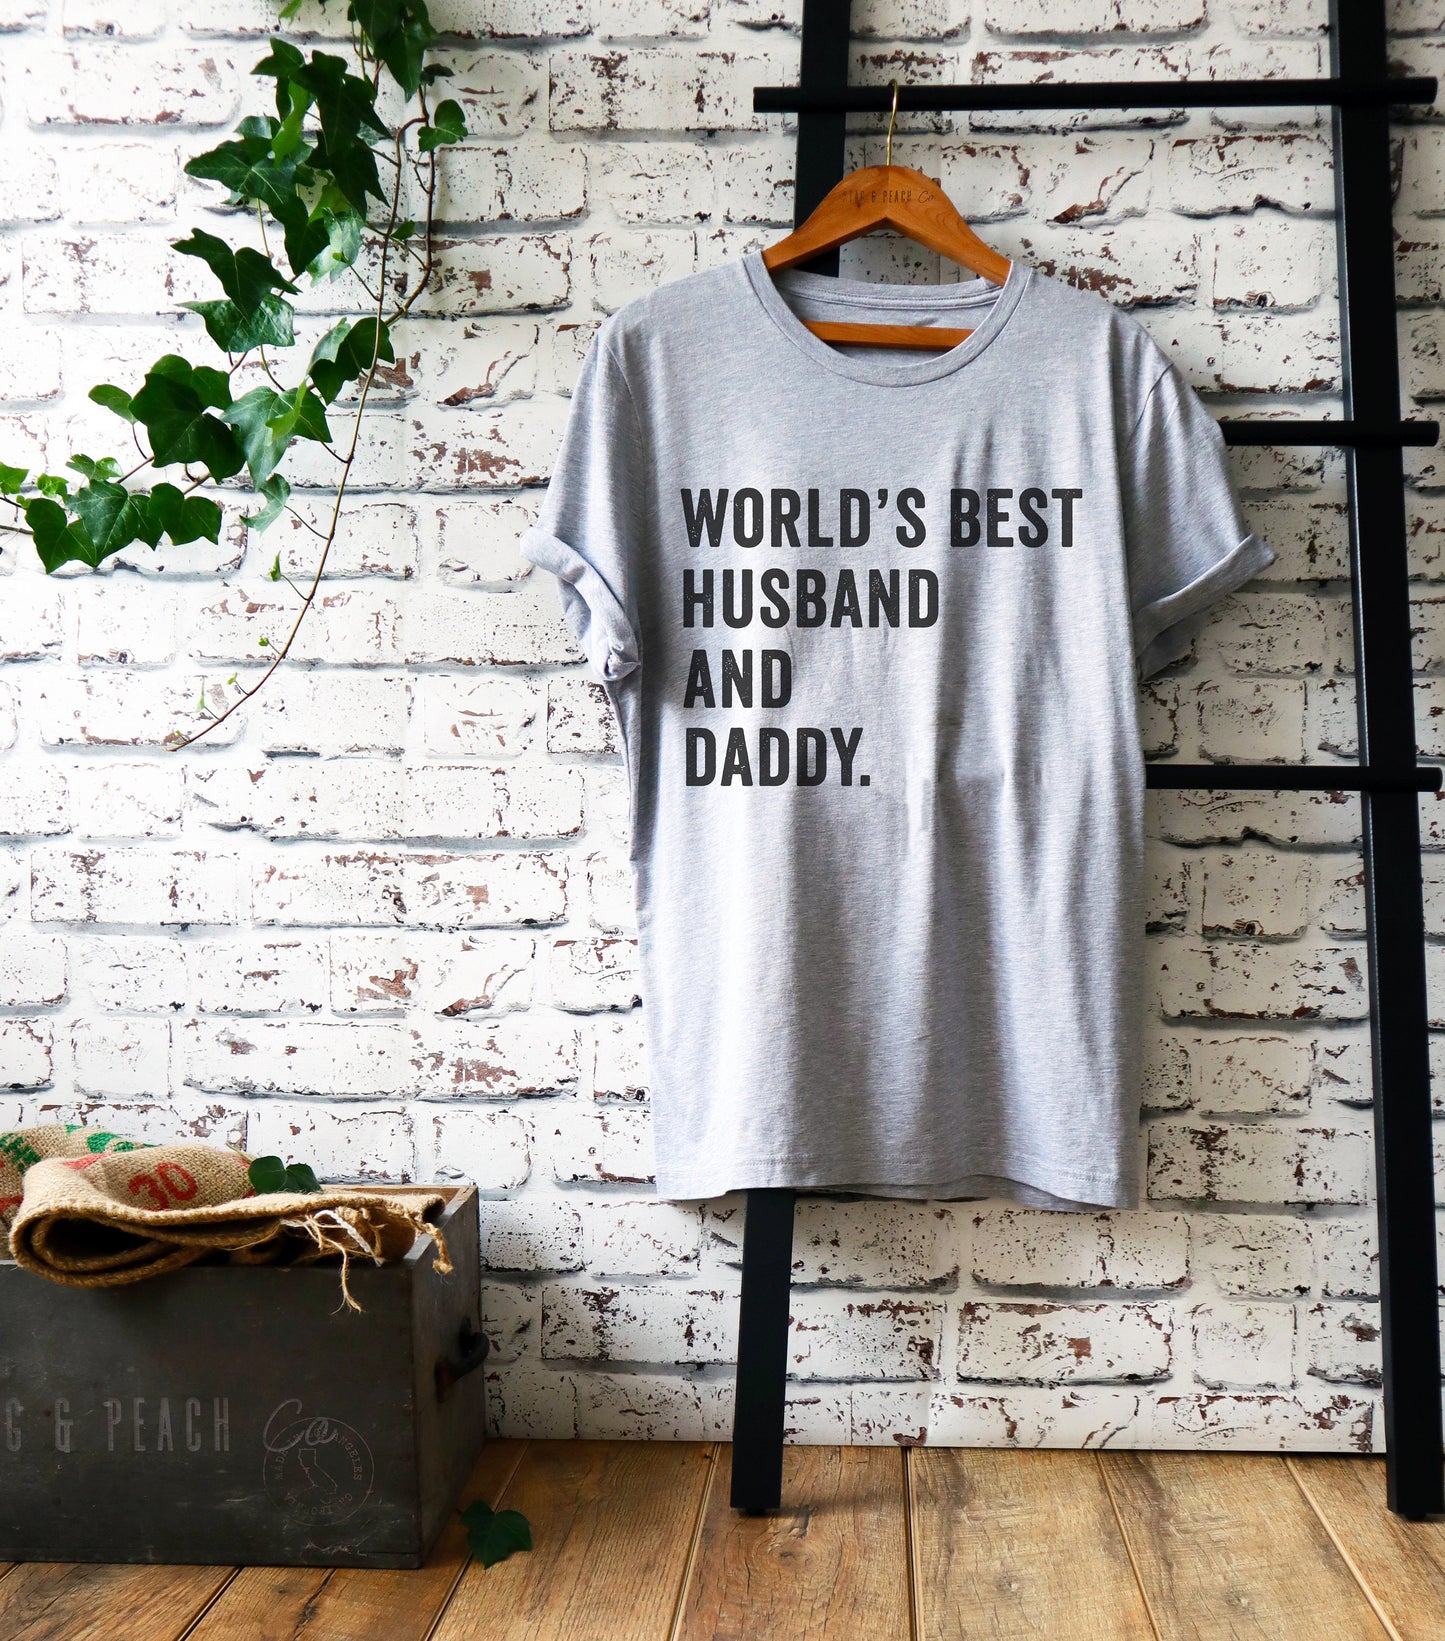 World's Best Husband & Daddy Unisex Shirt- Fathers Day Gift, Gift For Dad, Pregnancy Reveal Shirt, Husband Shirt, Hubby Shirt, New Dad Shirt